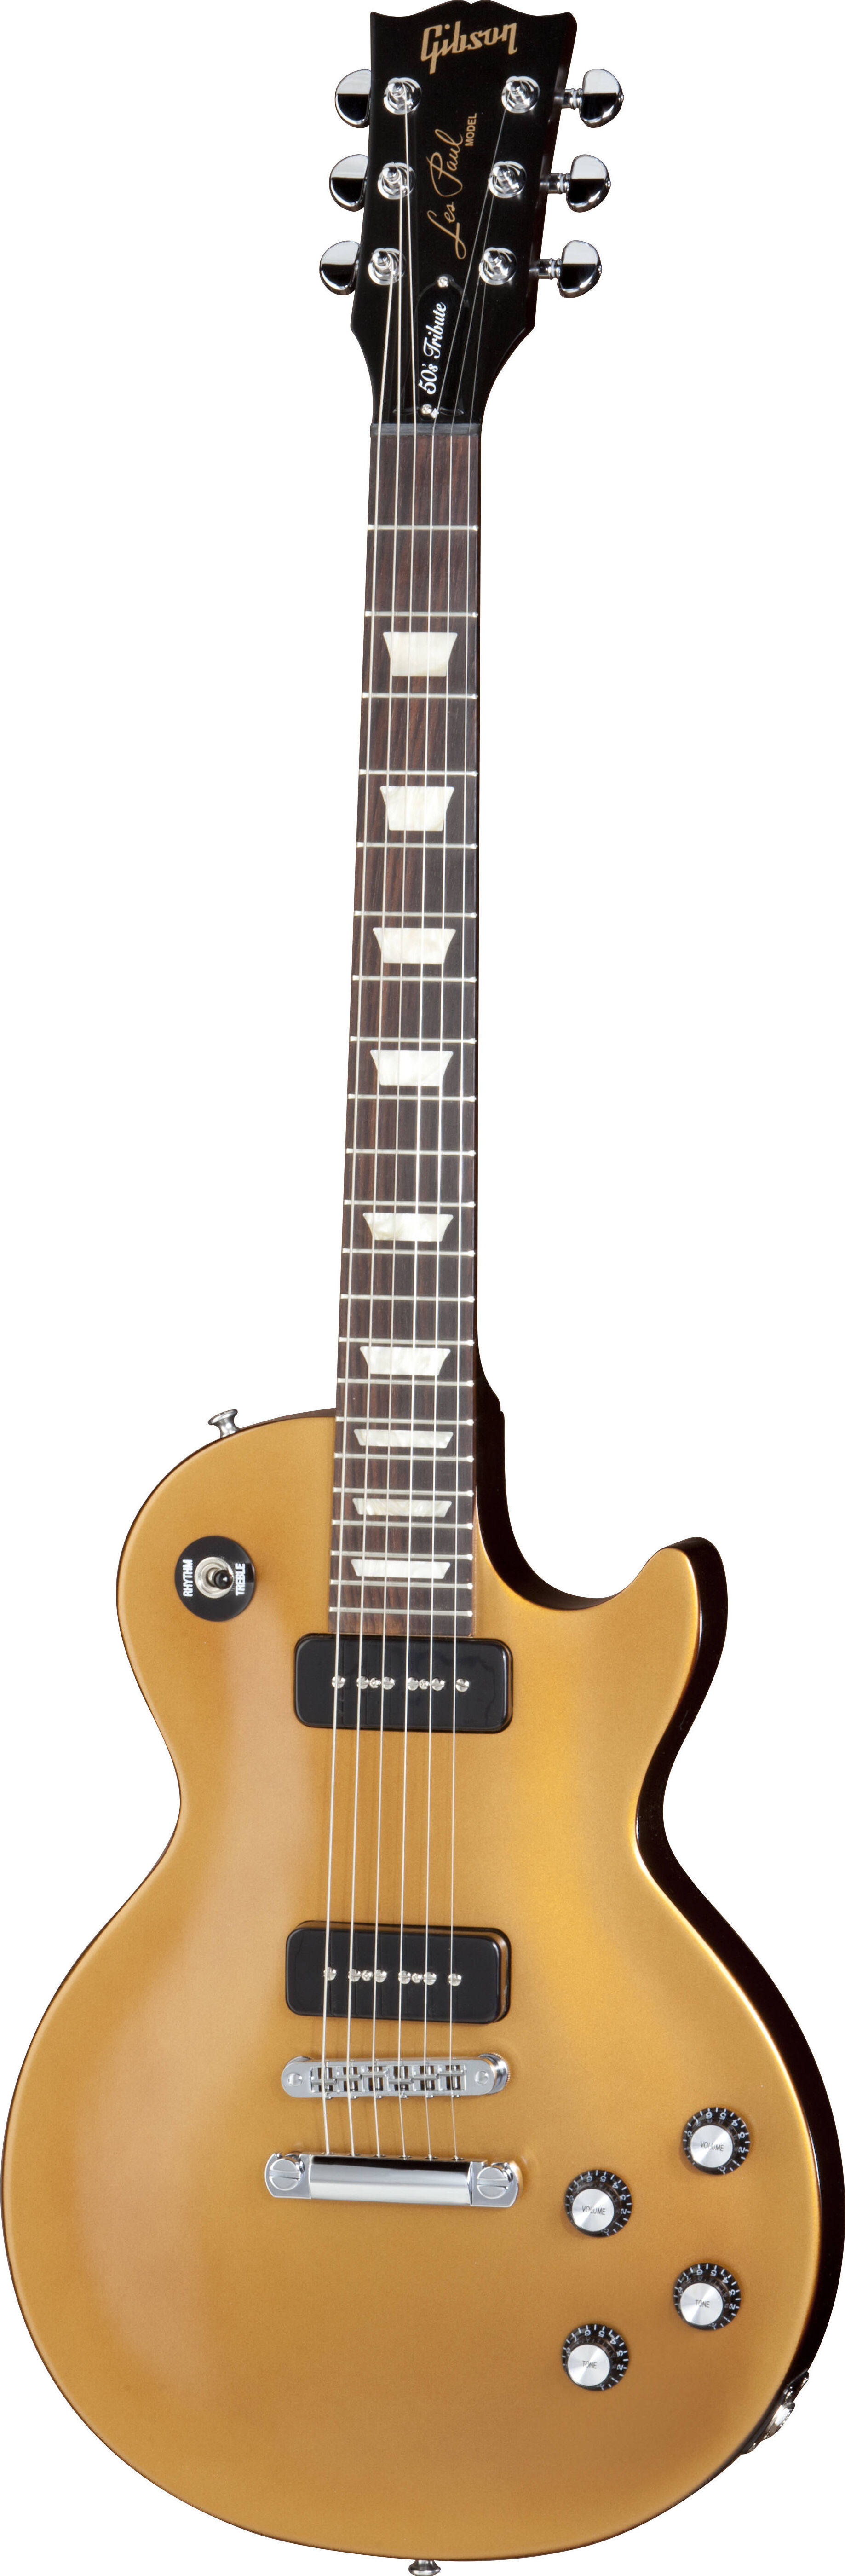 Gibson Les Paul 's Tribute   Zikinf